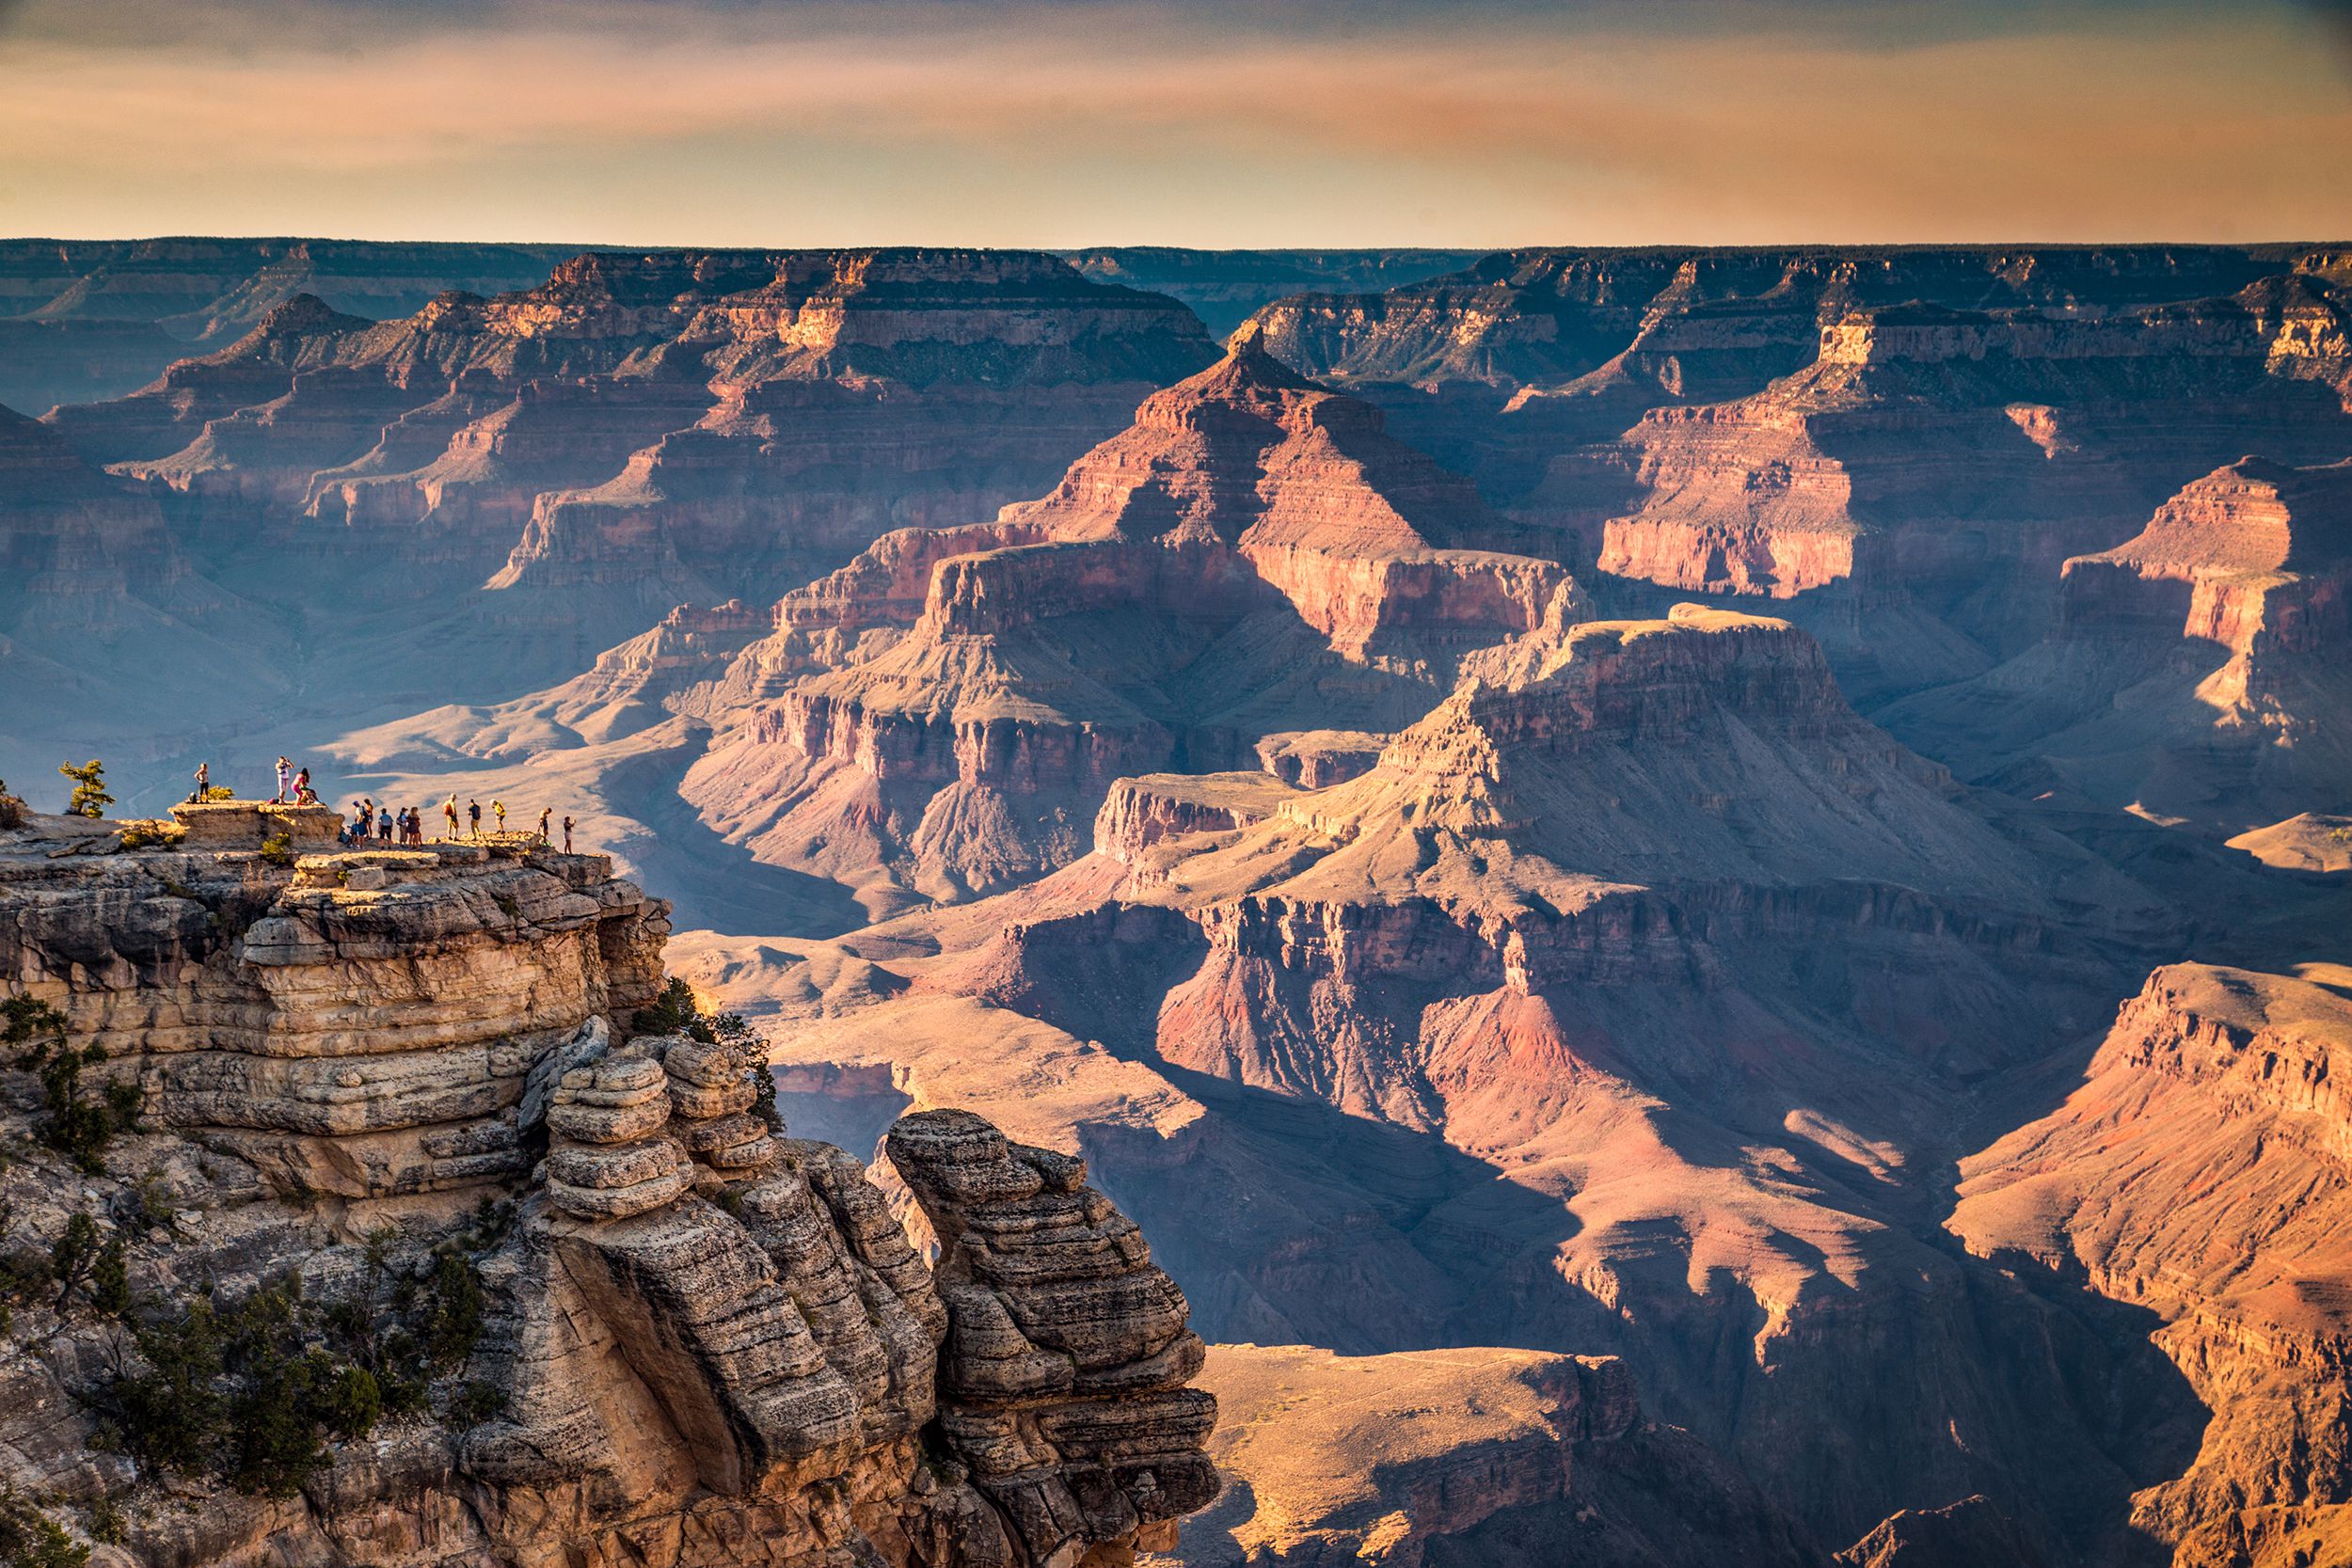 <p>The <a href="https://www.nps.gov/grca/index.htm">Grand Canyon</a> is a destination for travelers from around the world, and it's worth fighting the summertime crowds in the South Rim area. The visit can be as inexpensive as you make it; camping and grocery stores are friends to anyone on a budget. Take the time for a short hike, along the South Kaibab Trail to Cedar Ridge (1.5 miles) or Skeleton Point (3 miles), for example, and enjoy stunning views of the canyon from a different perspective.</p><p><b>Related:</b> <a href="https://blog.cheapism.com/cheap-national-park-vacations/">19 Money-Saving Tips for Visiting National Parks</a></p>